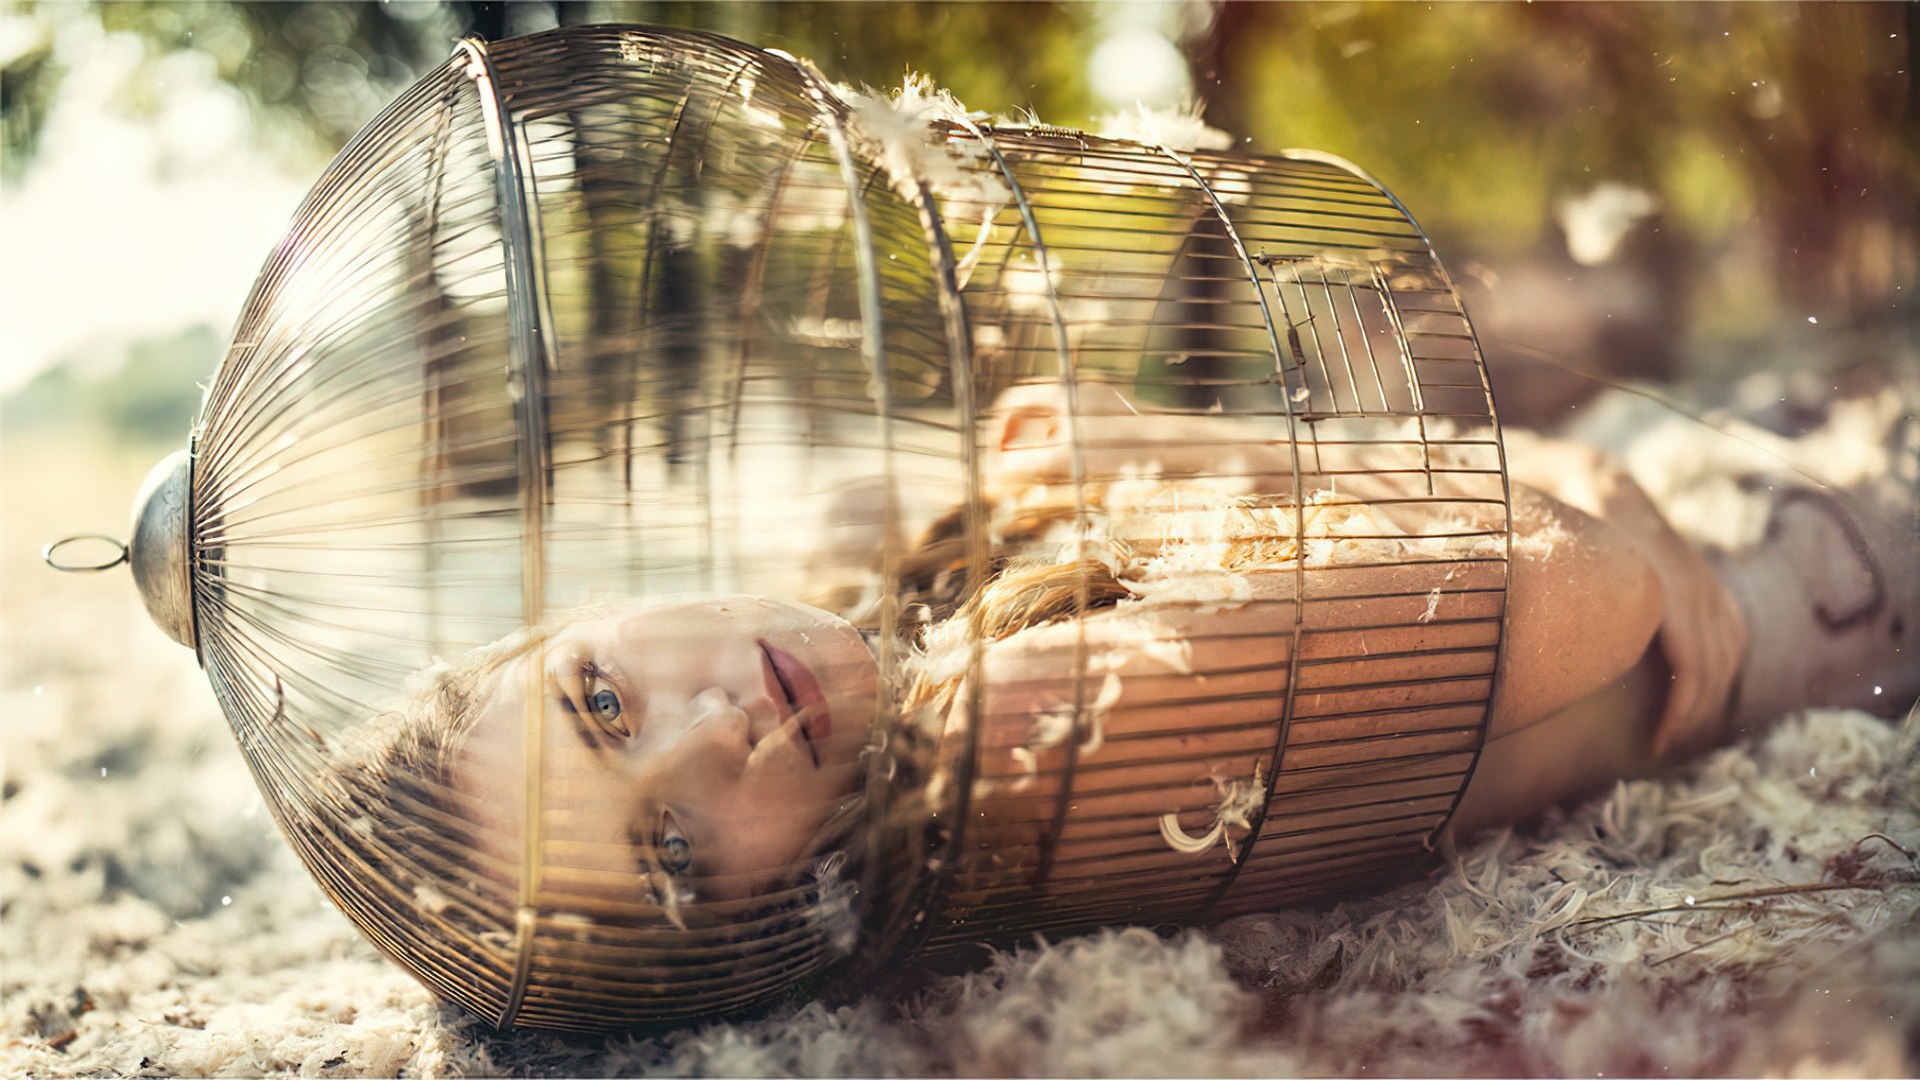 women, model, blonde, blue eyes, cage, feather, outdoor wallpaper for mobile